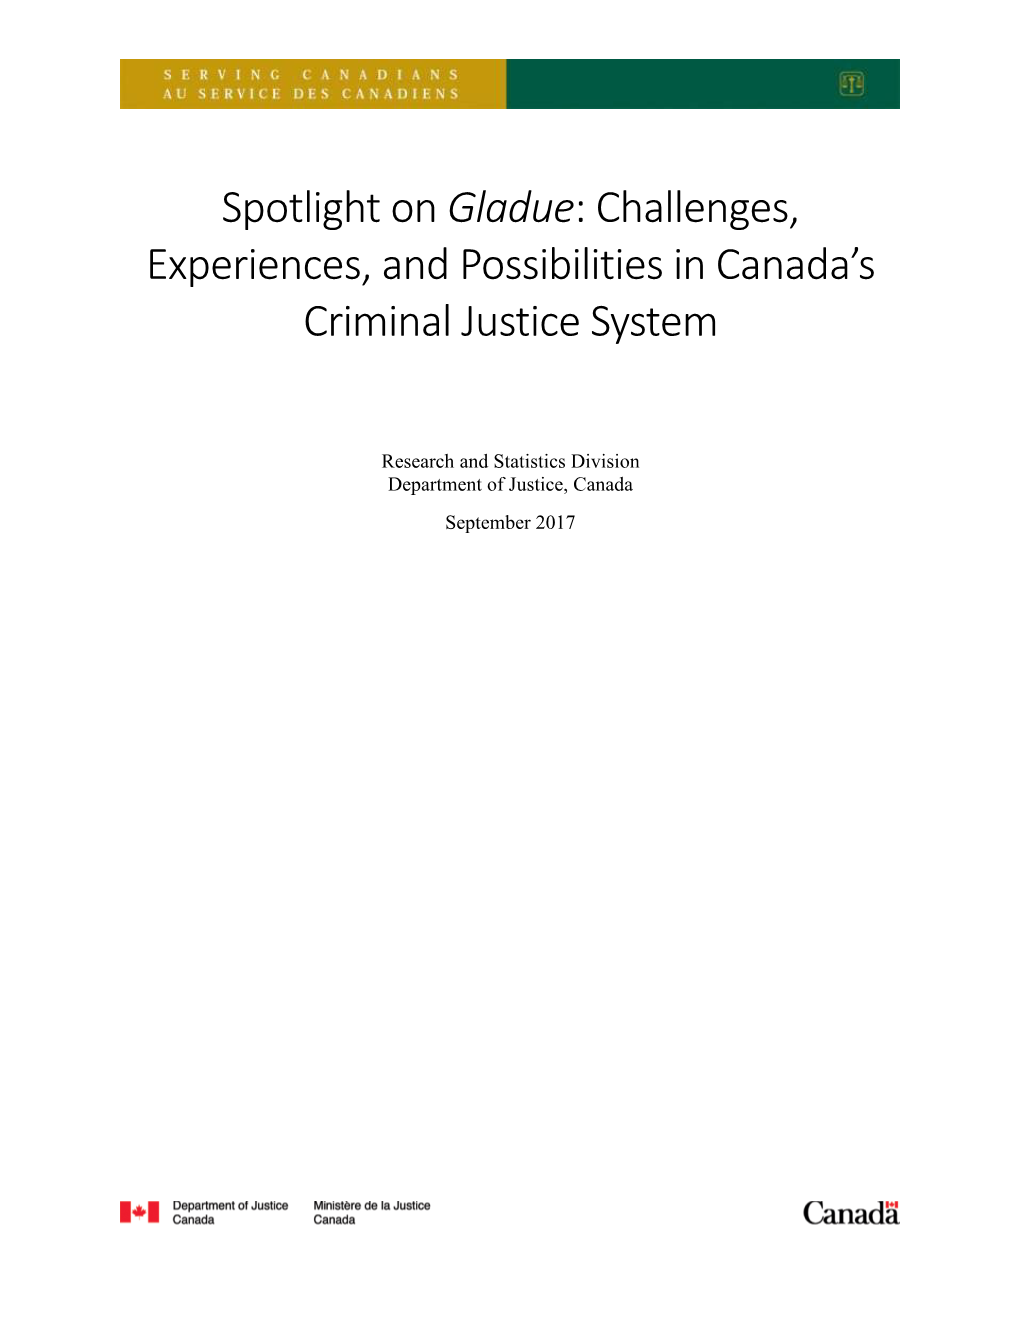 Spotlight on Gladue: Challenges, Experiences, and Possibilities in Canada’S Criminal Justice System